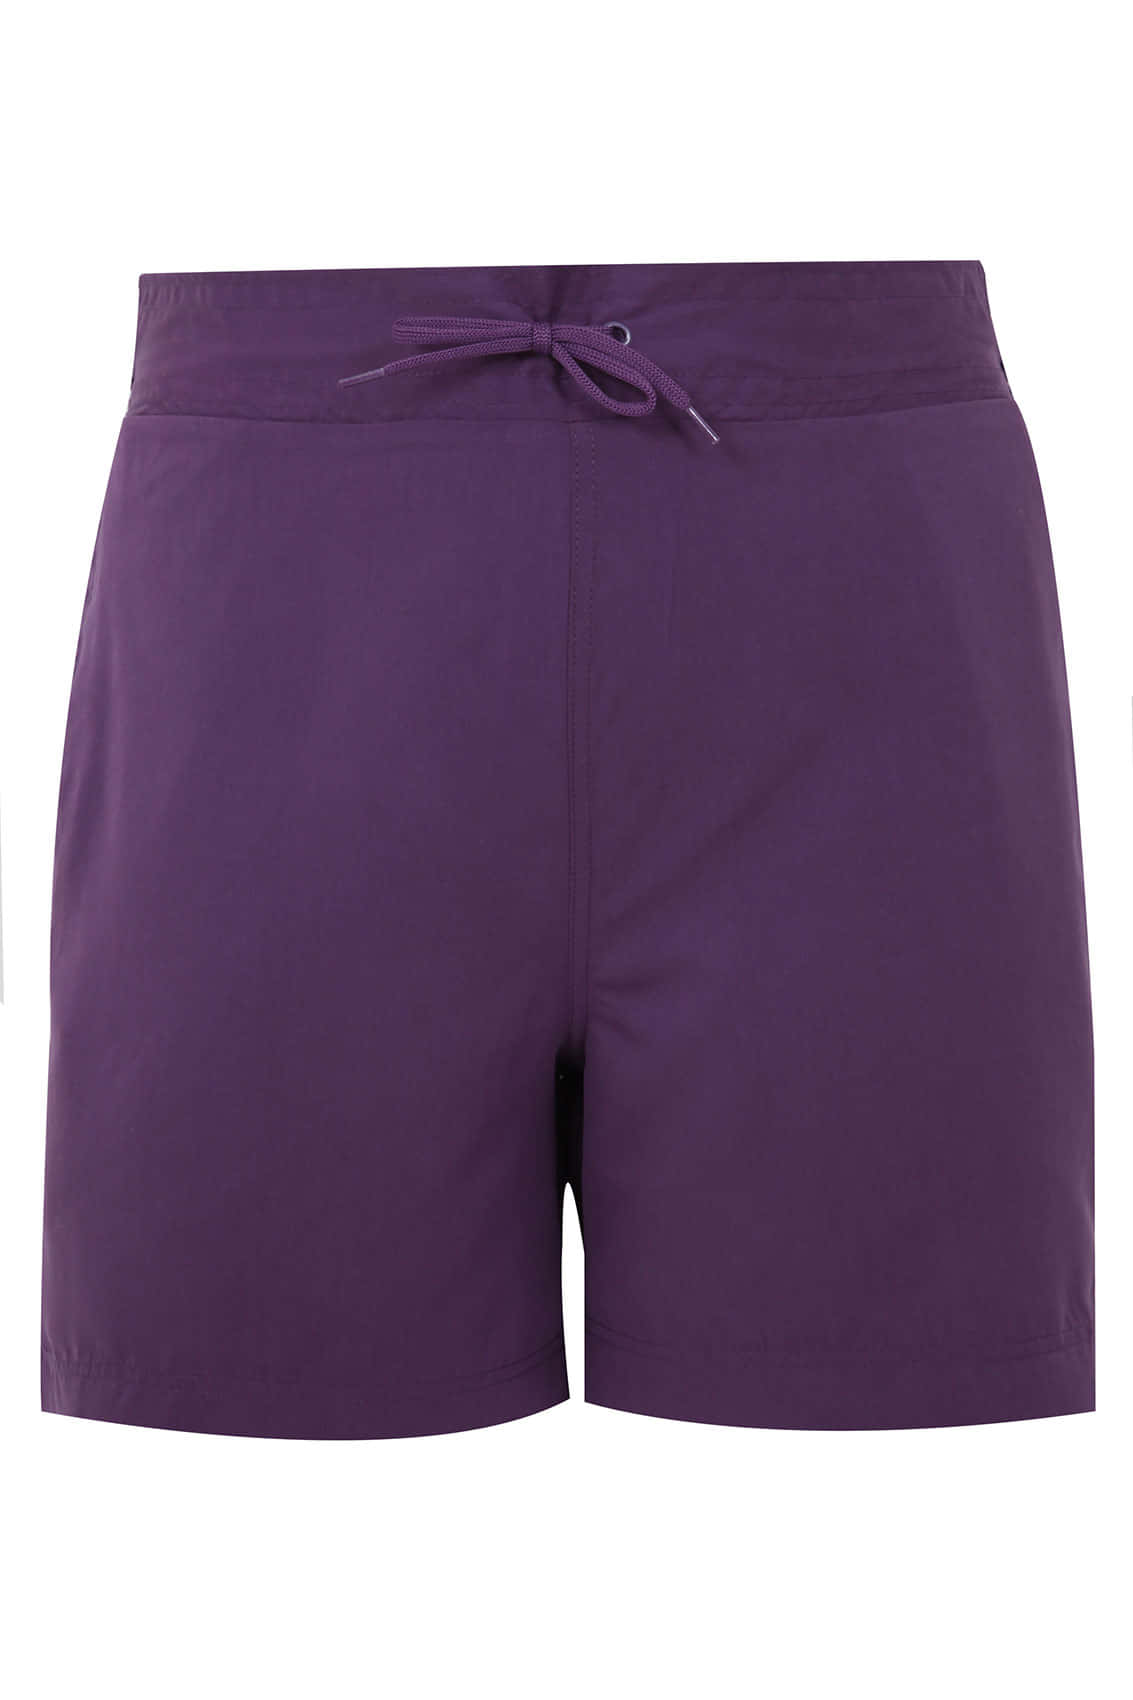 Add a pop of color with a stylish pair of purple shorts Wallpaper